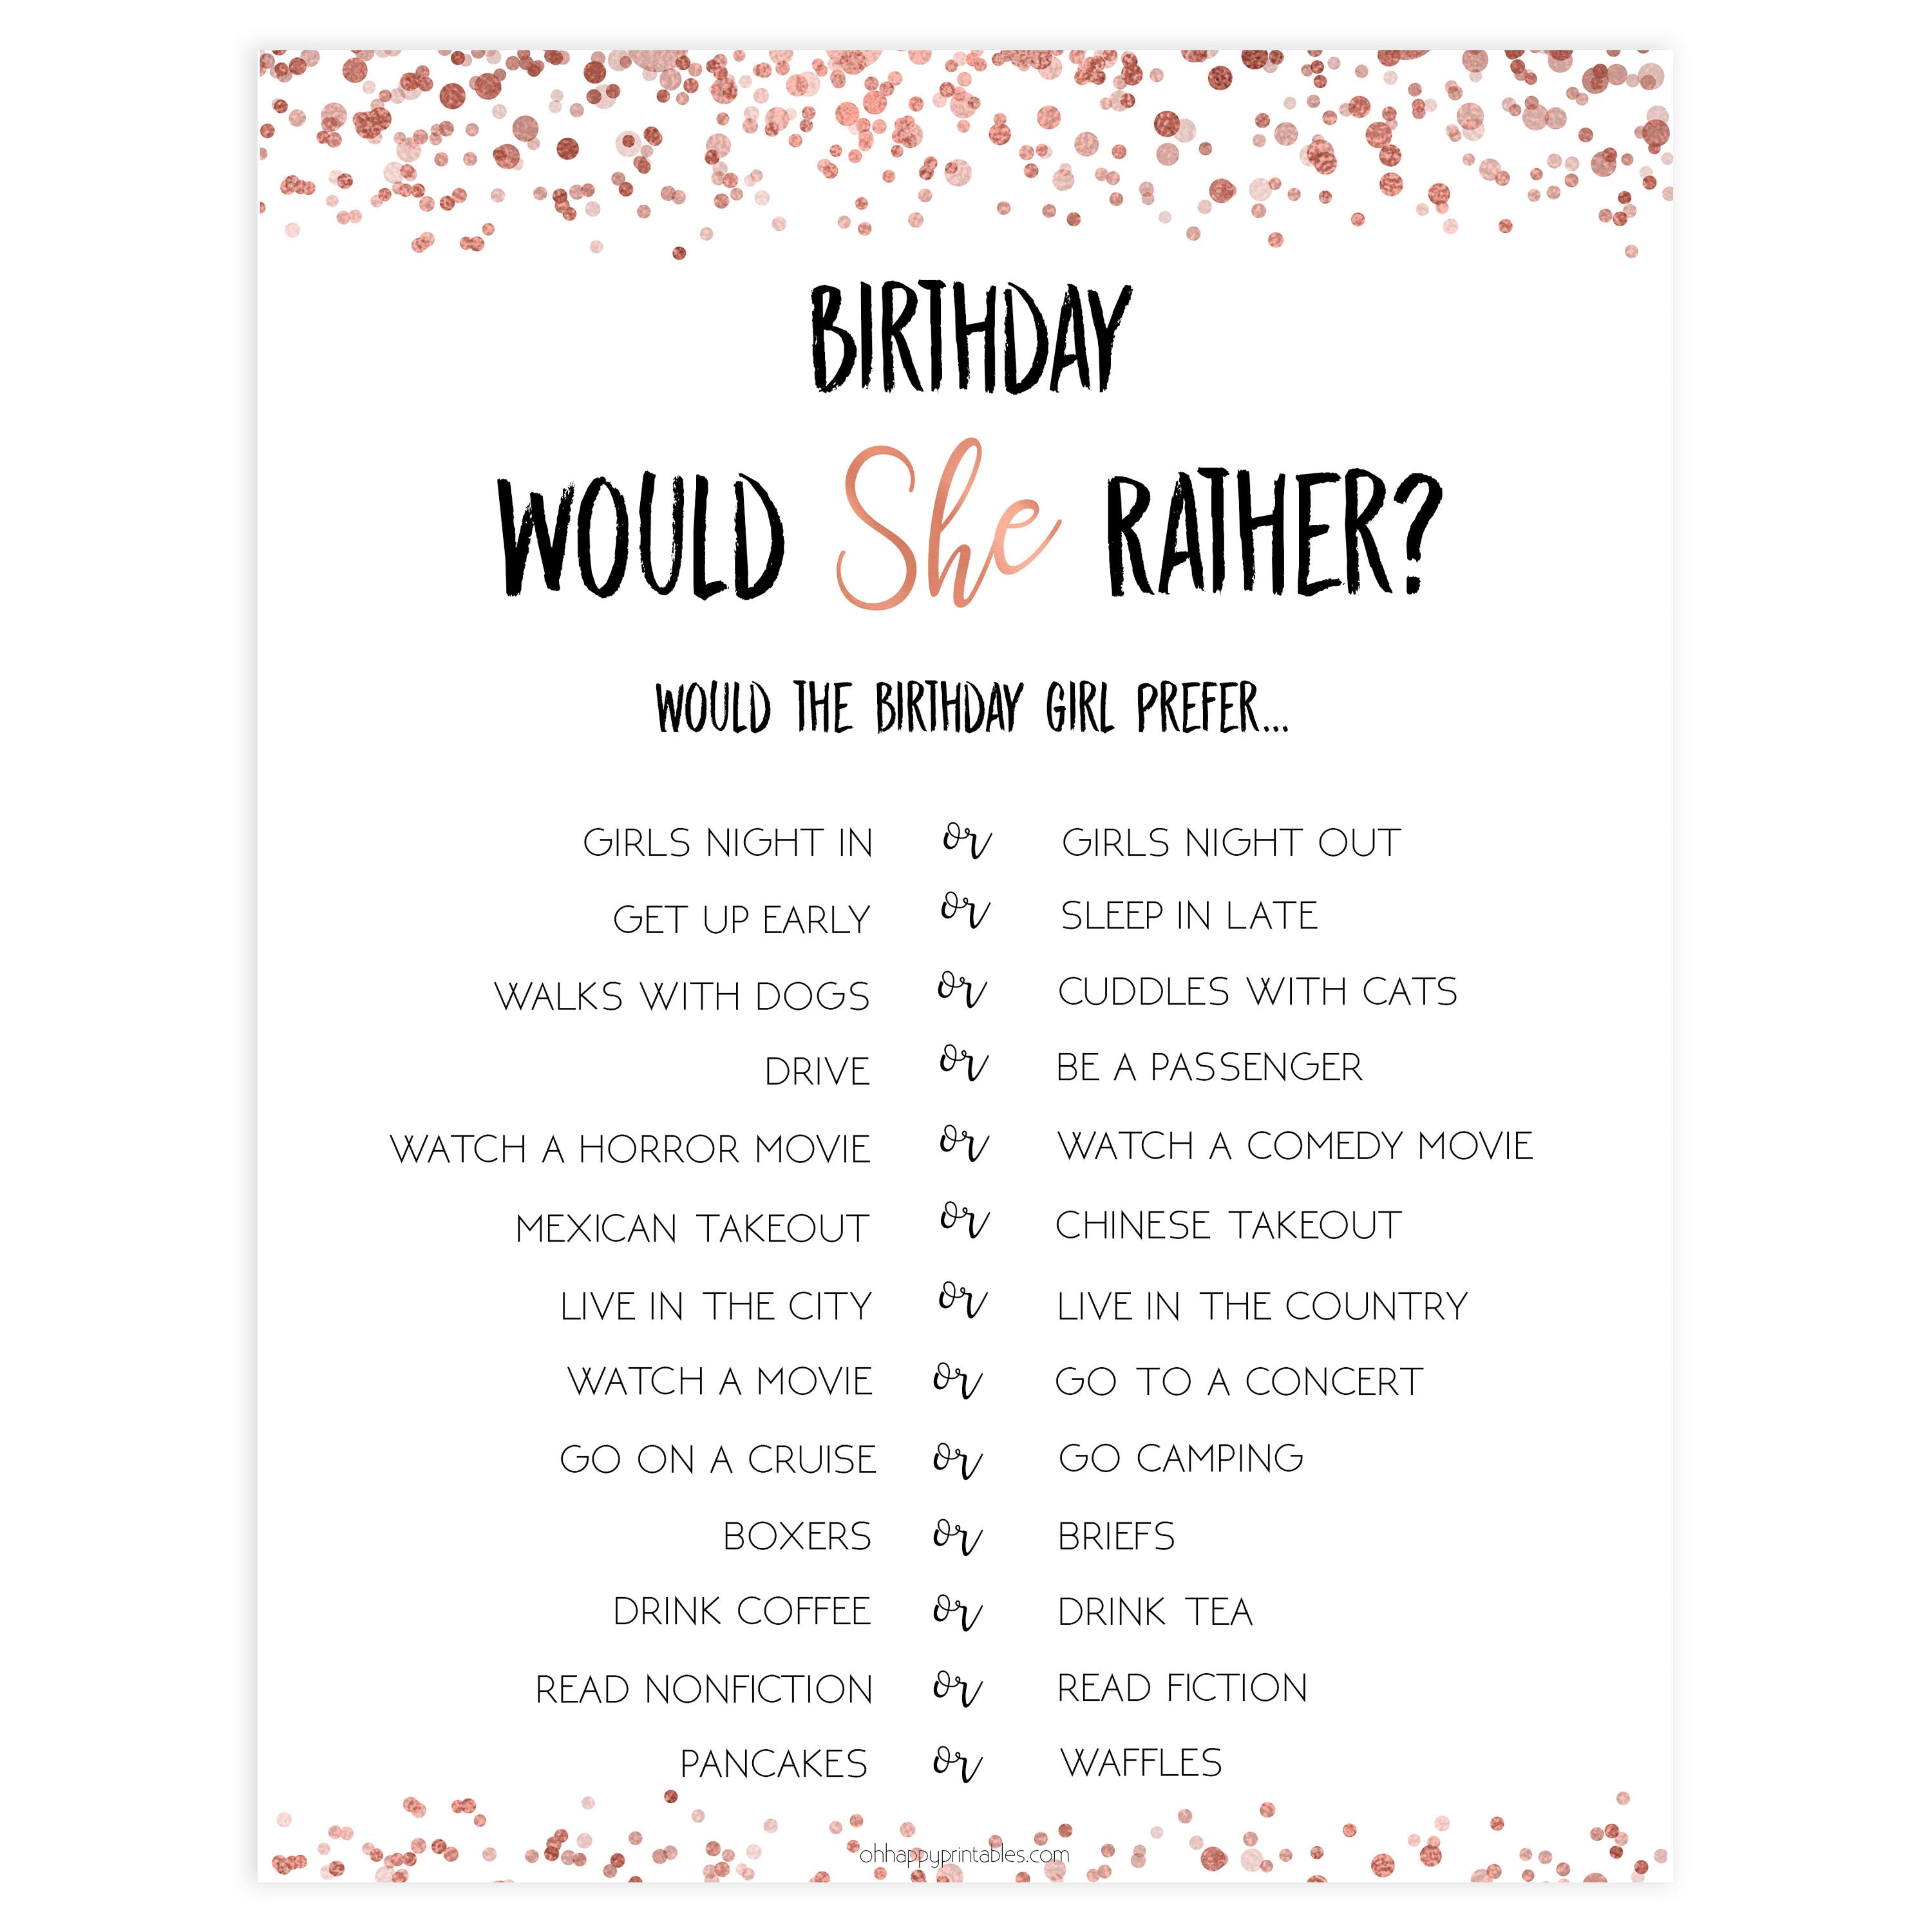 birthday would she rather game, birthday games, printable birthday games, rose gold birthday games, would she rather game